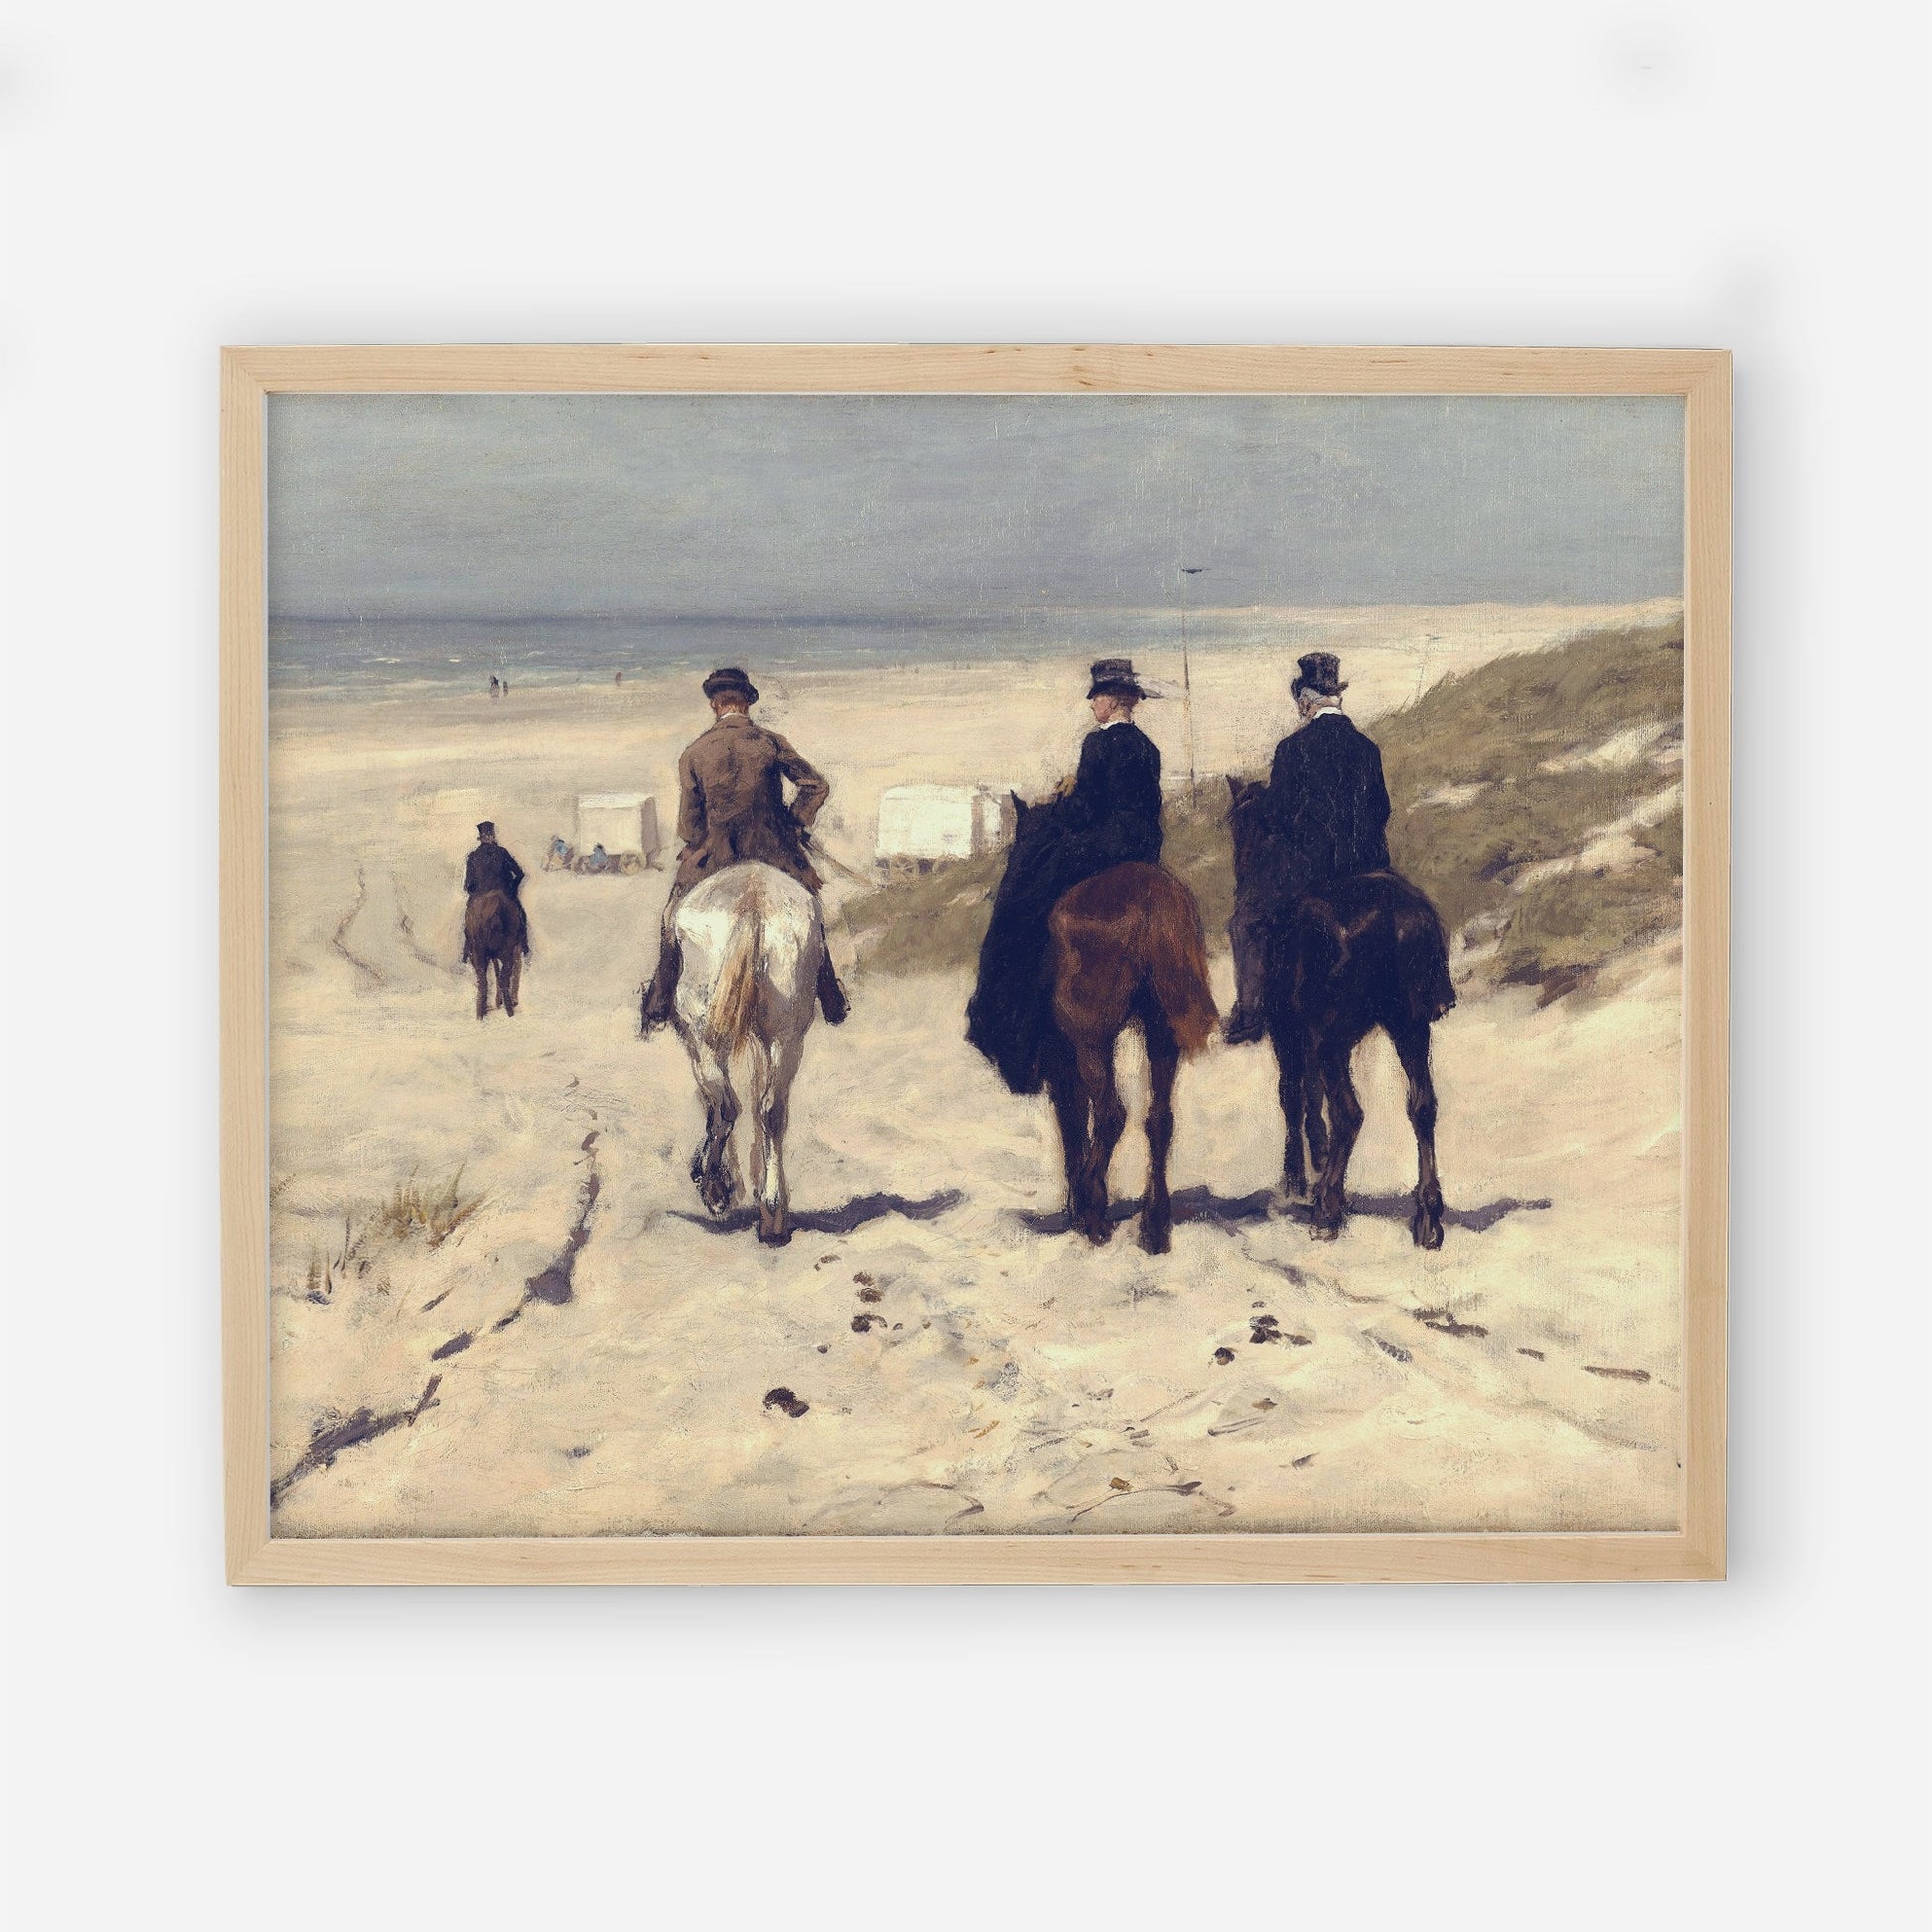 Vintage Horses on Beach Wall Print - Printed and shipped to you on premium paper